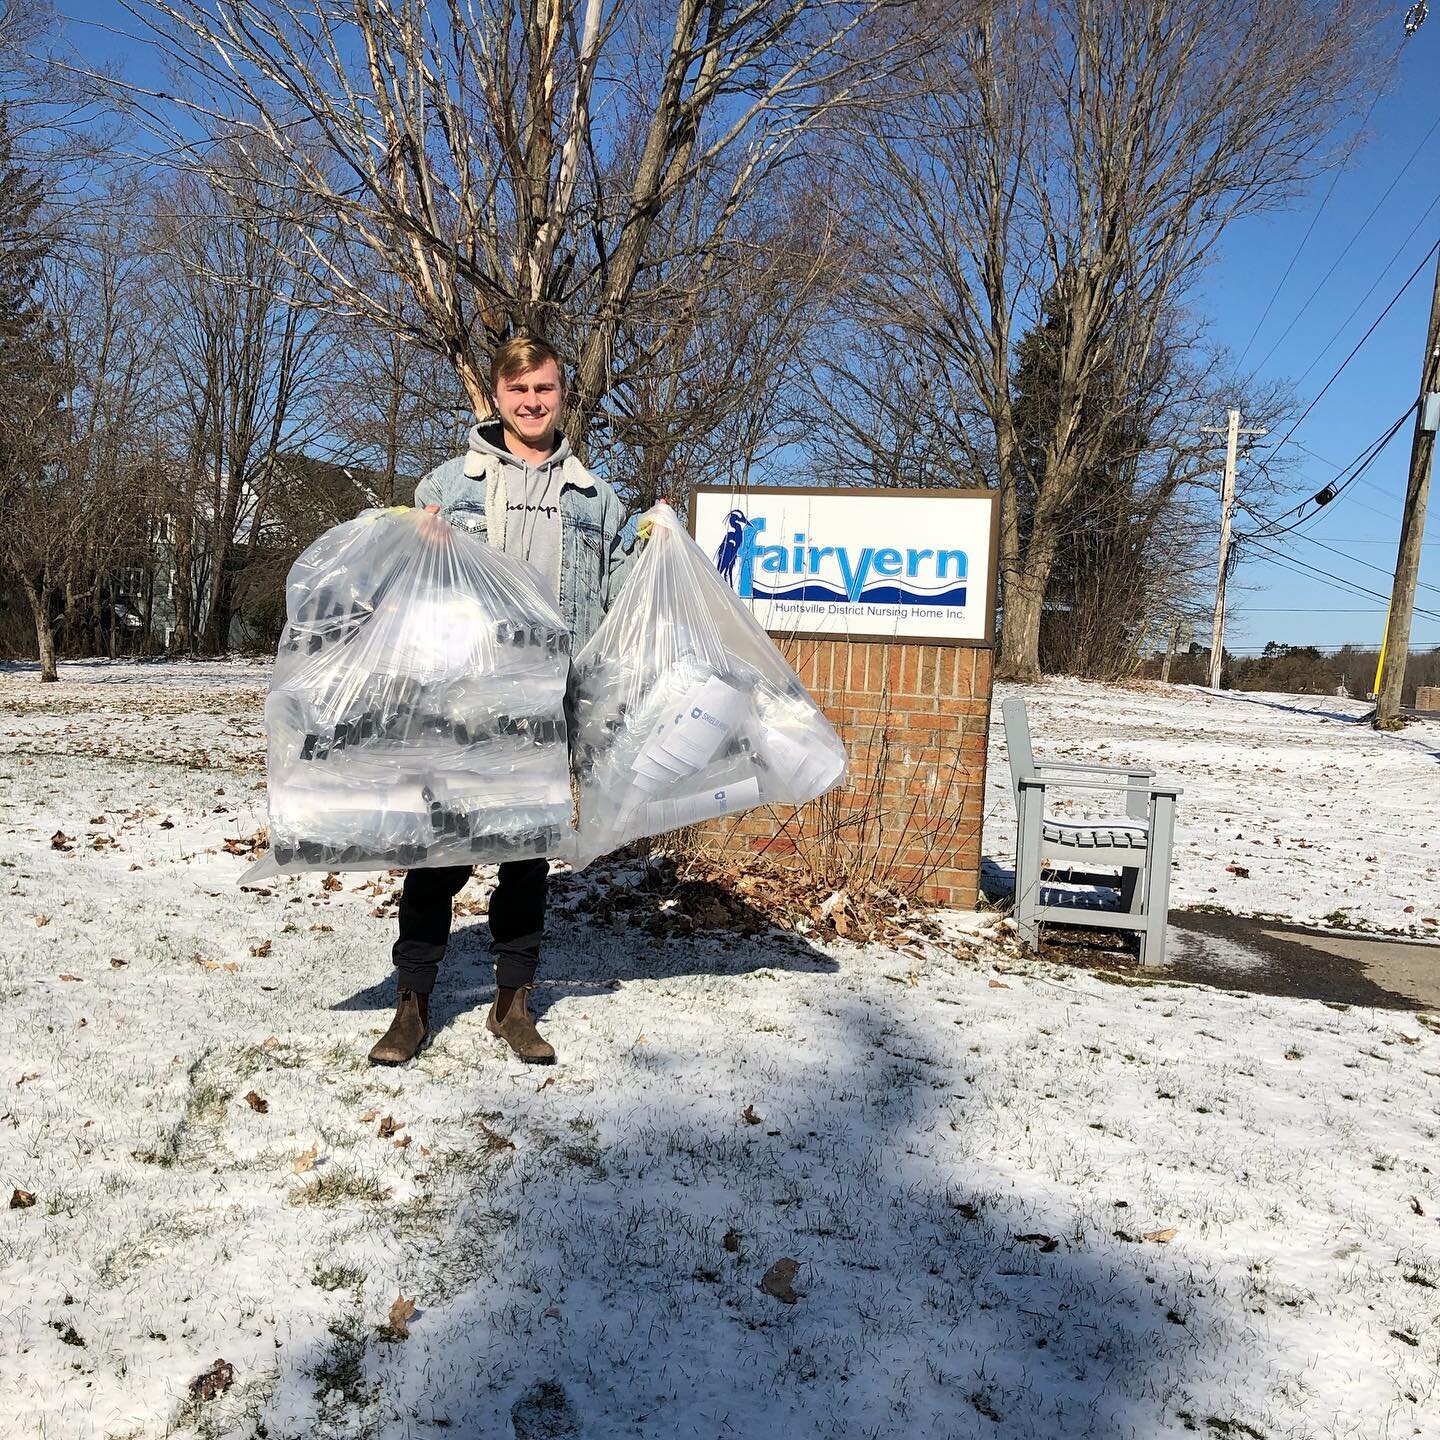 My son Ryan drove to Huntsville today and dropped off 100 amazing reusable face shields to Fairvern District Nursing Home.  We are helping Rahim Bhimani with the assembly and distribution of face shields to long term care facilities. Rahim is the mas